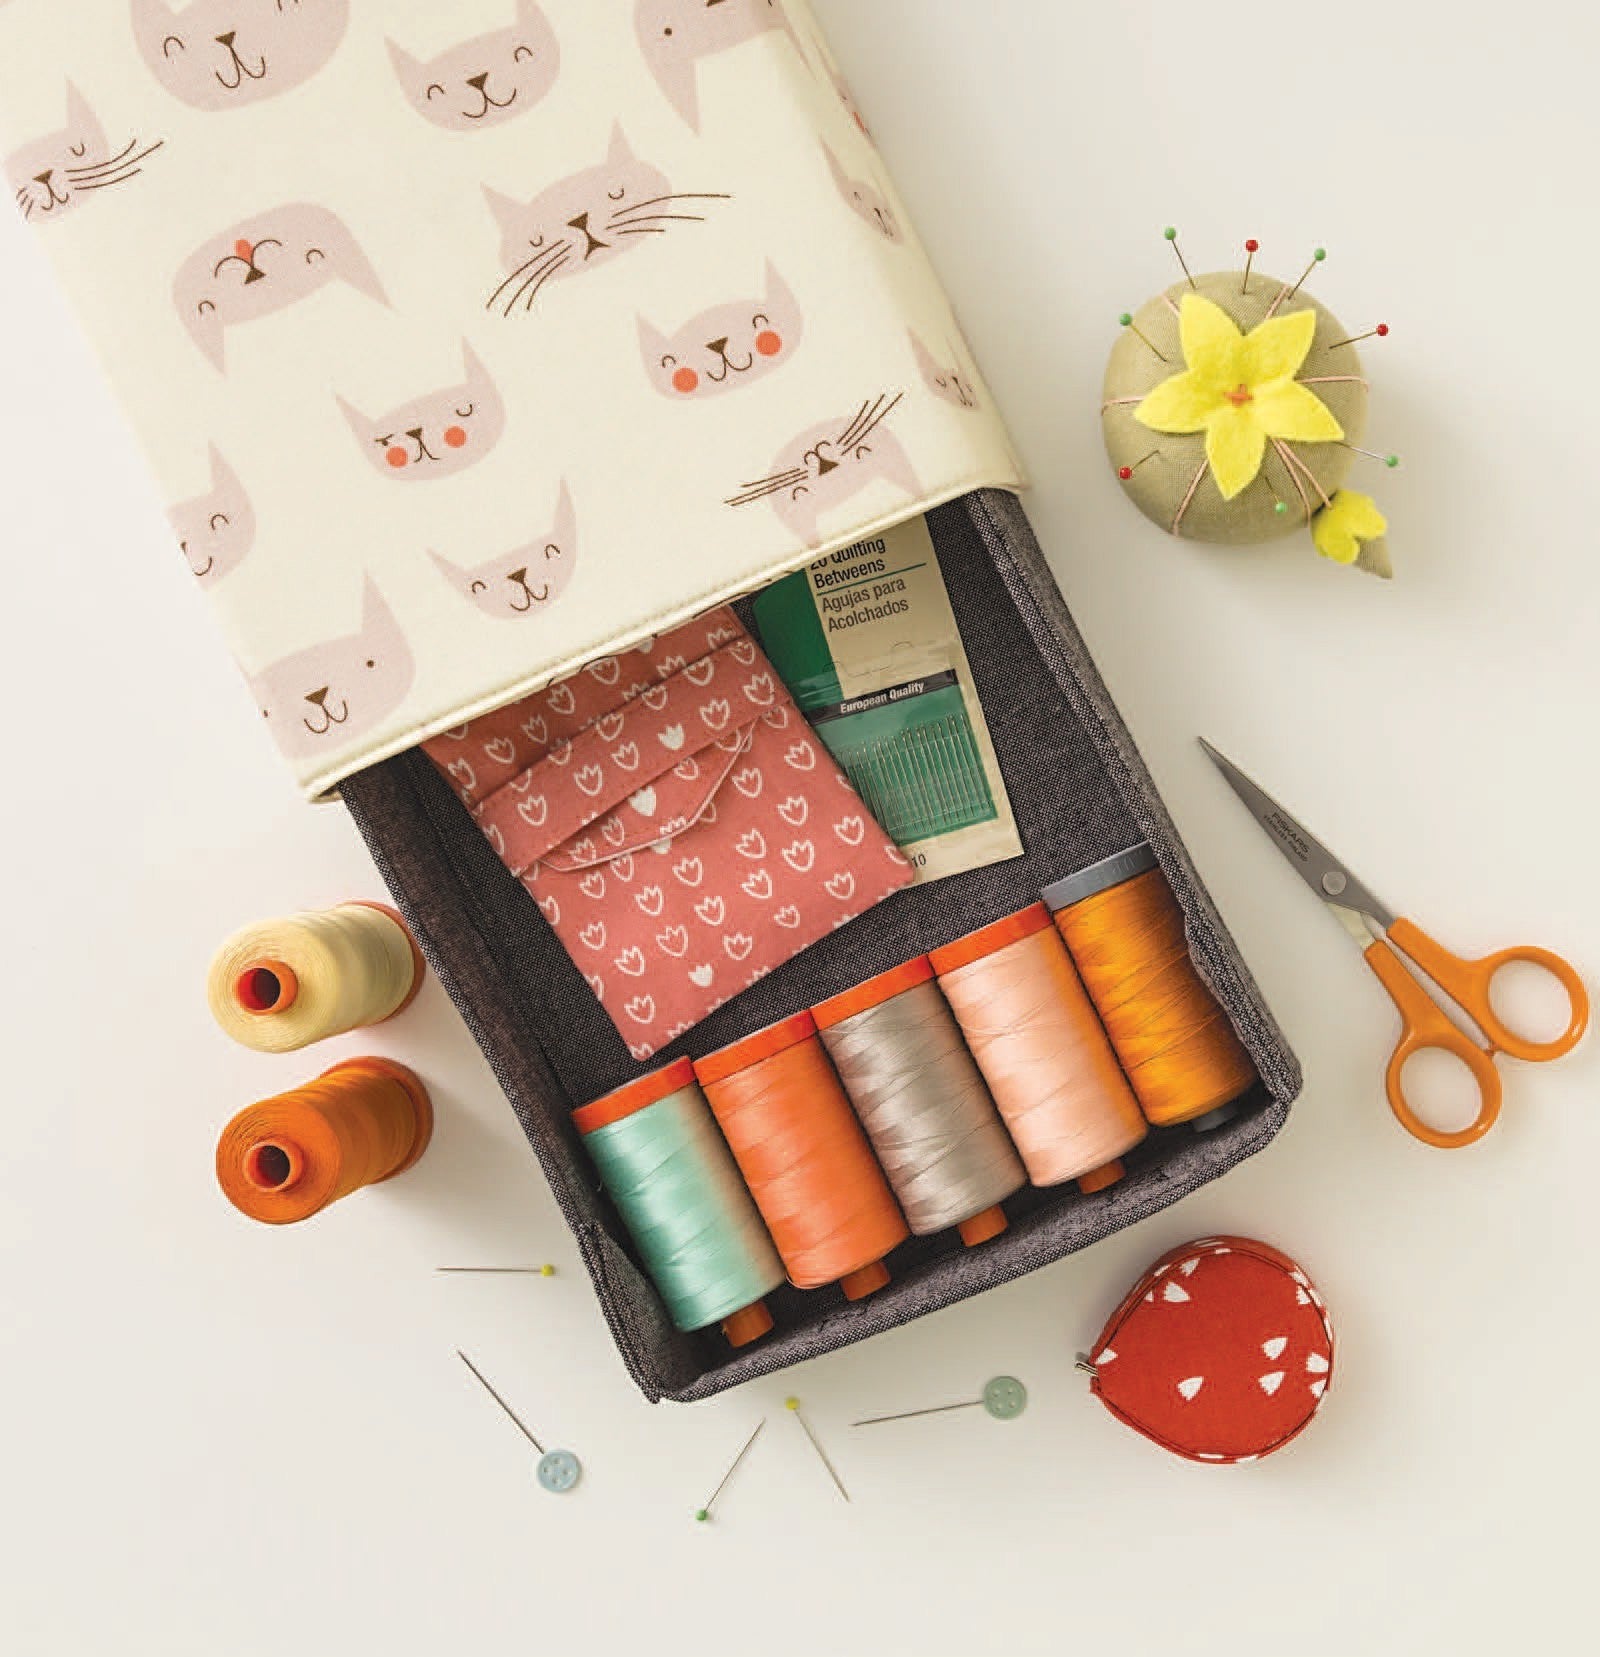 Stitched Sewing Organizers Sewing Pattern Book by Aneela Hoey for Stash Books